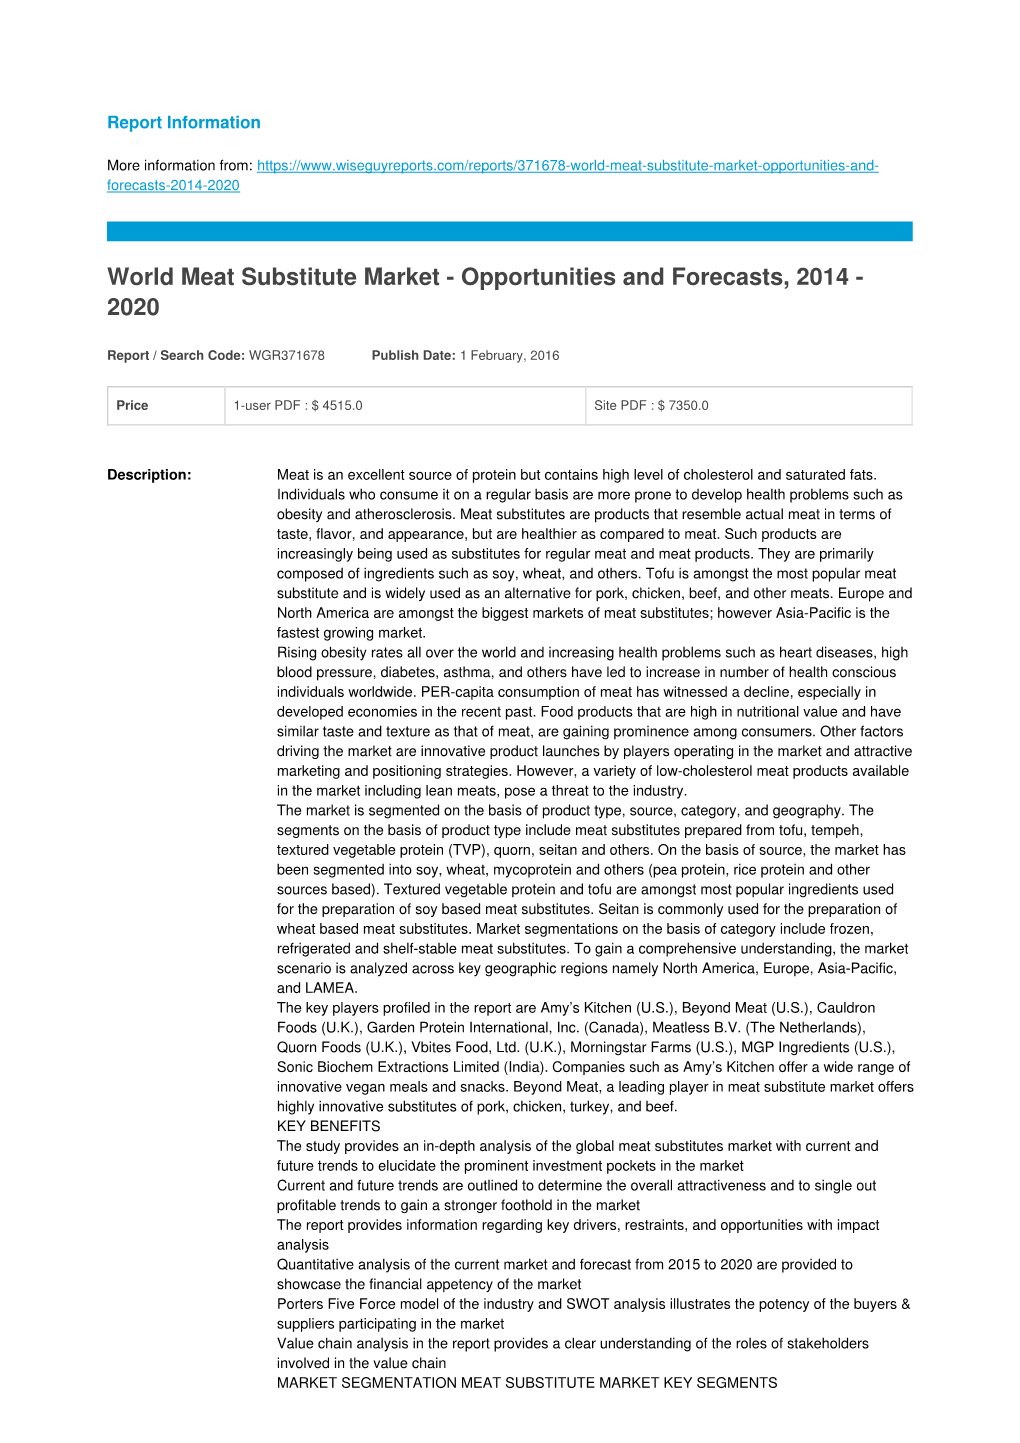 World Meat Substitute Market - Opportunities and Forecasts, 2014 - 2020